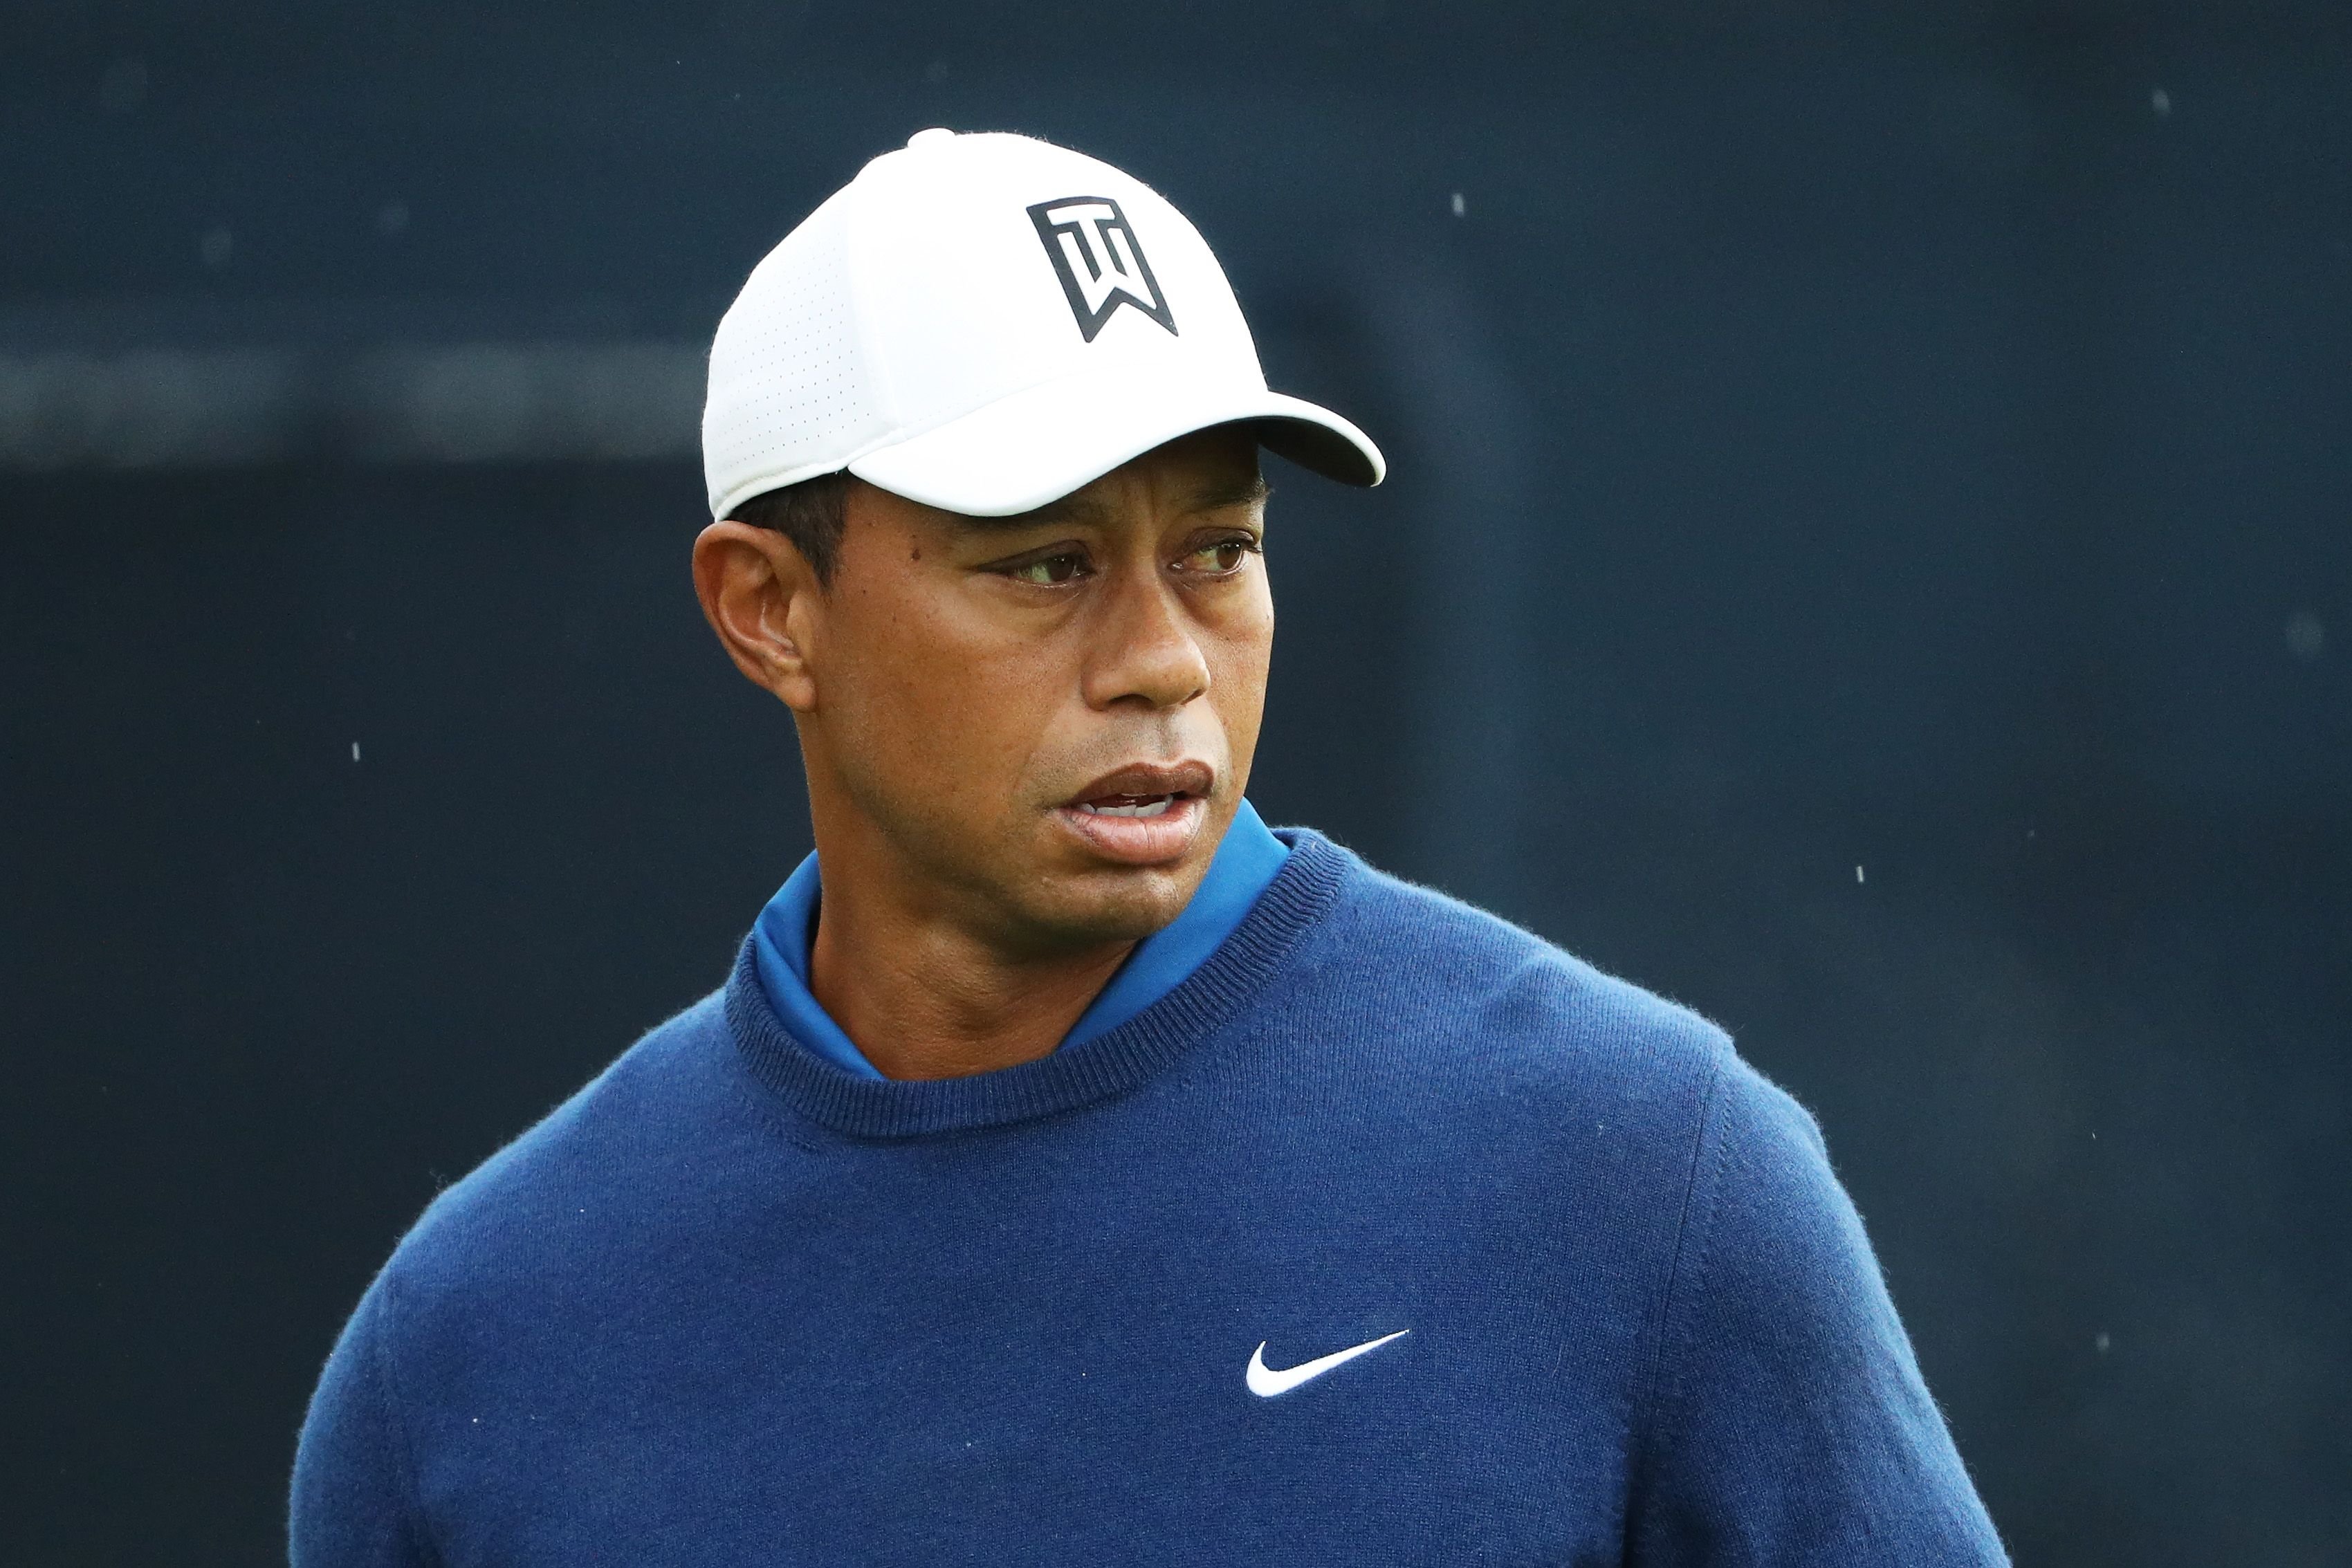 Tiger Woods of the United States warms up on the practice range during the first round of the 2019 PGA Championship at the Bethpage Black course on May 16, 2019 in Farmingdale, New York. | Photo: Getty Images